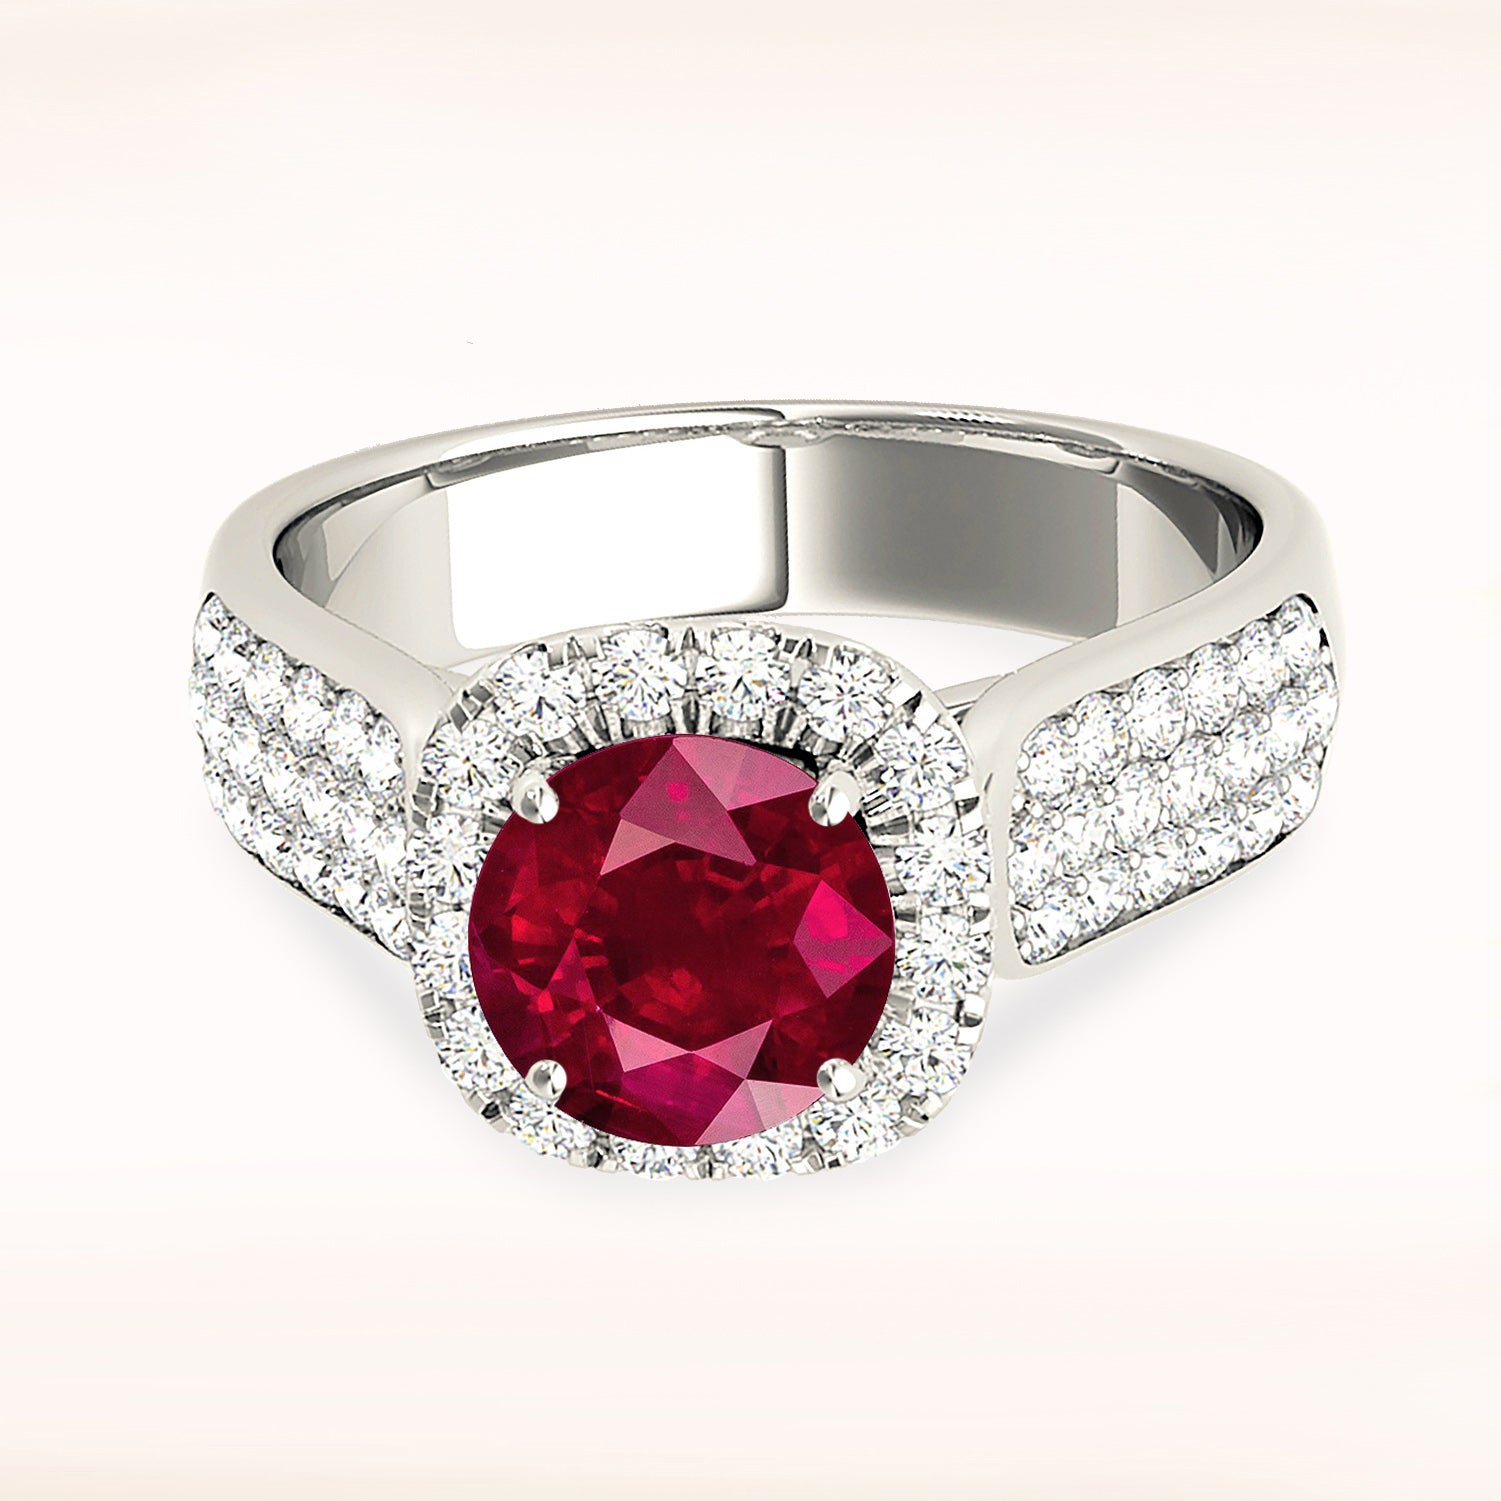 1.35 ct. Genuine Ruby Ring With 0.75 ctw. Diamond Halo And Triple Row Diamond Band-in 14K/18K White, Yellow, Rose Gold and Platinum - Christmas Jewelry Gift -VIRABYANI